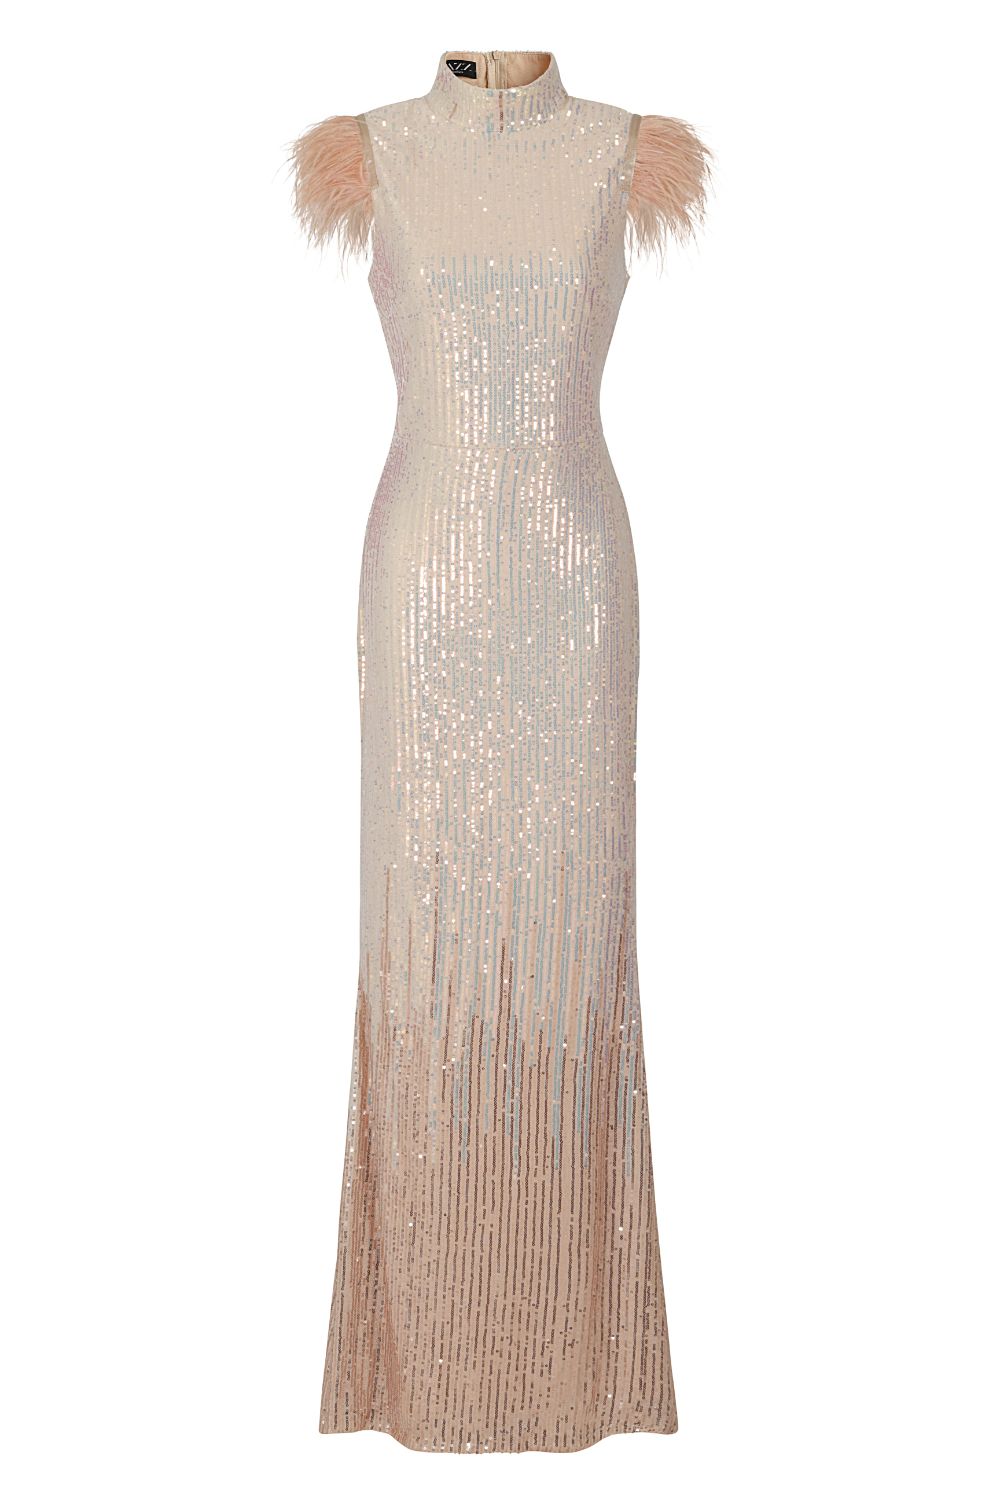 Bliss Vip Rose Gold Silver Ombre Sequin Feather Maxi Mermaid Dress